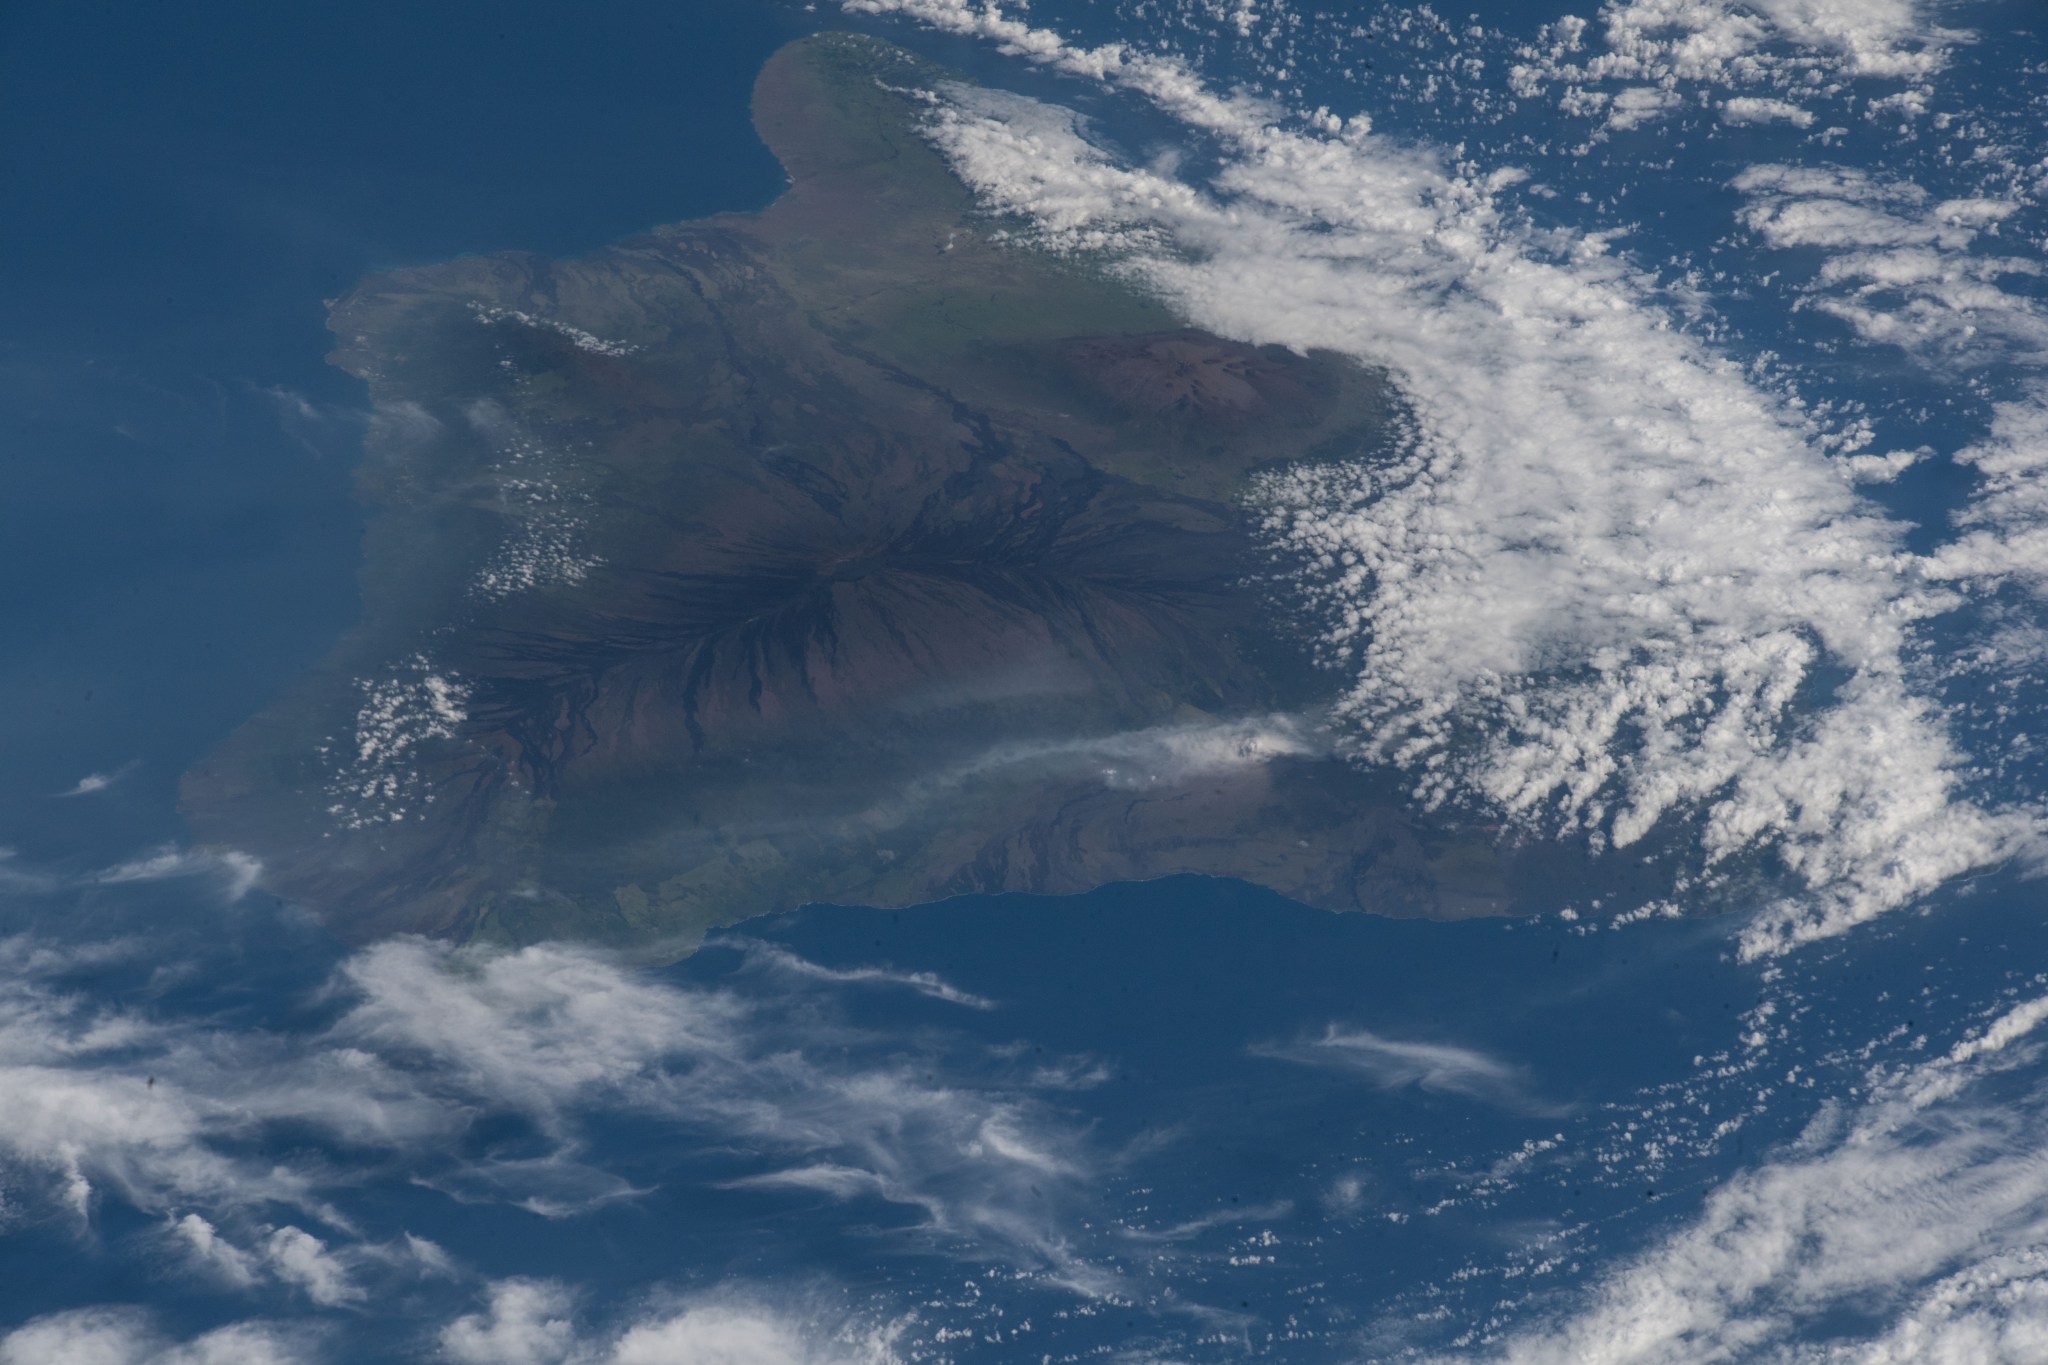 The ash plume from the Kilauea volcano on the big island of Hawaii was pictured May 12, 2018, from the International Space Station. The ash is gray over the green and brown landmass, all surrounded by bright blue water.